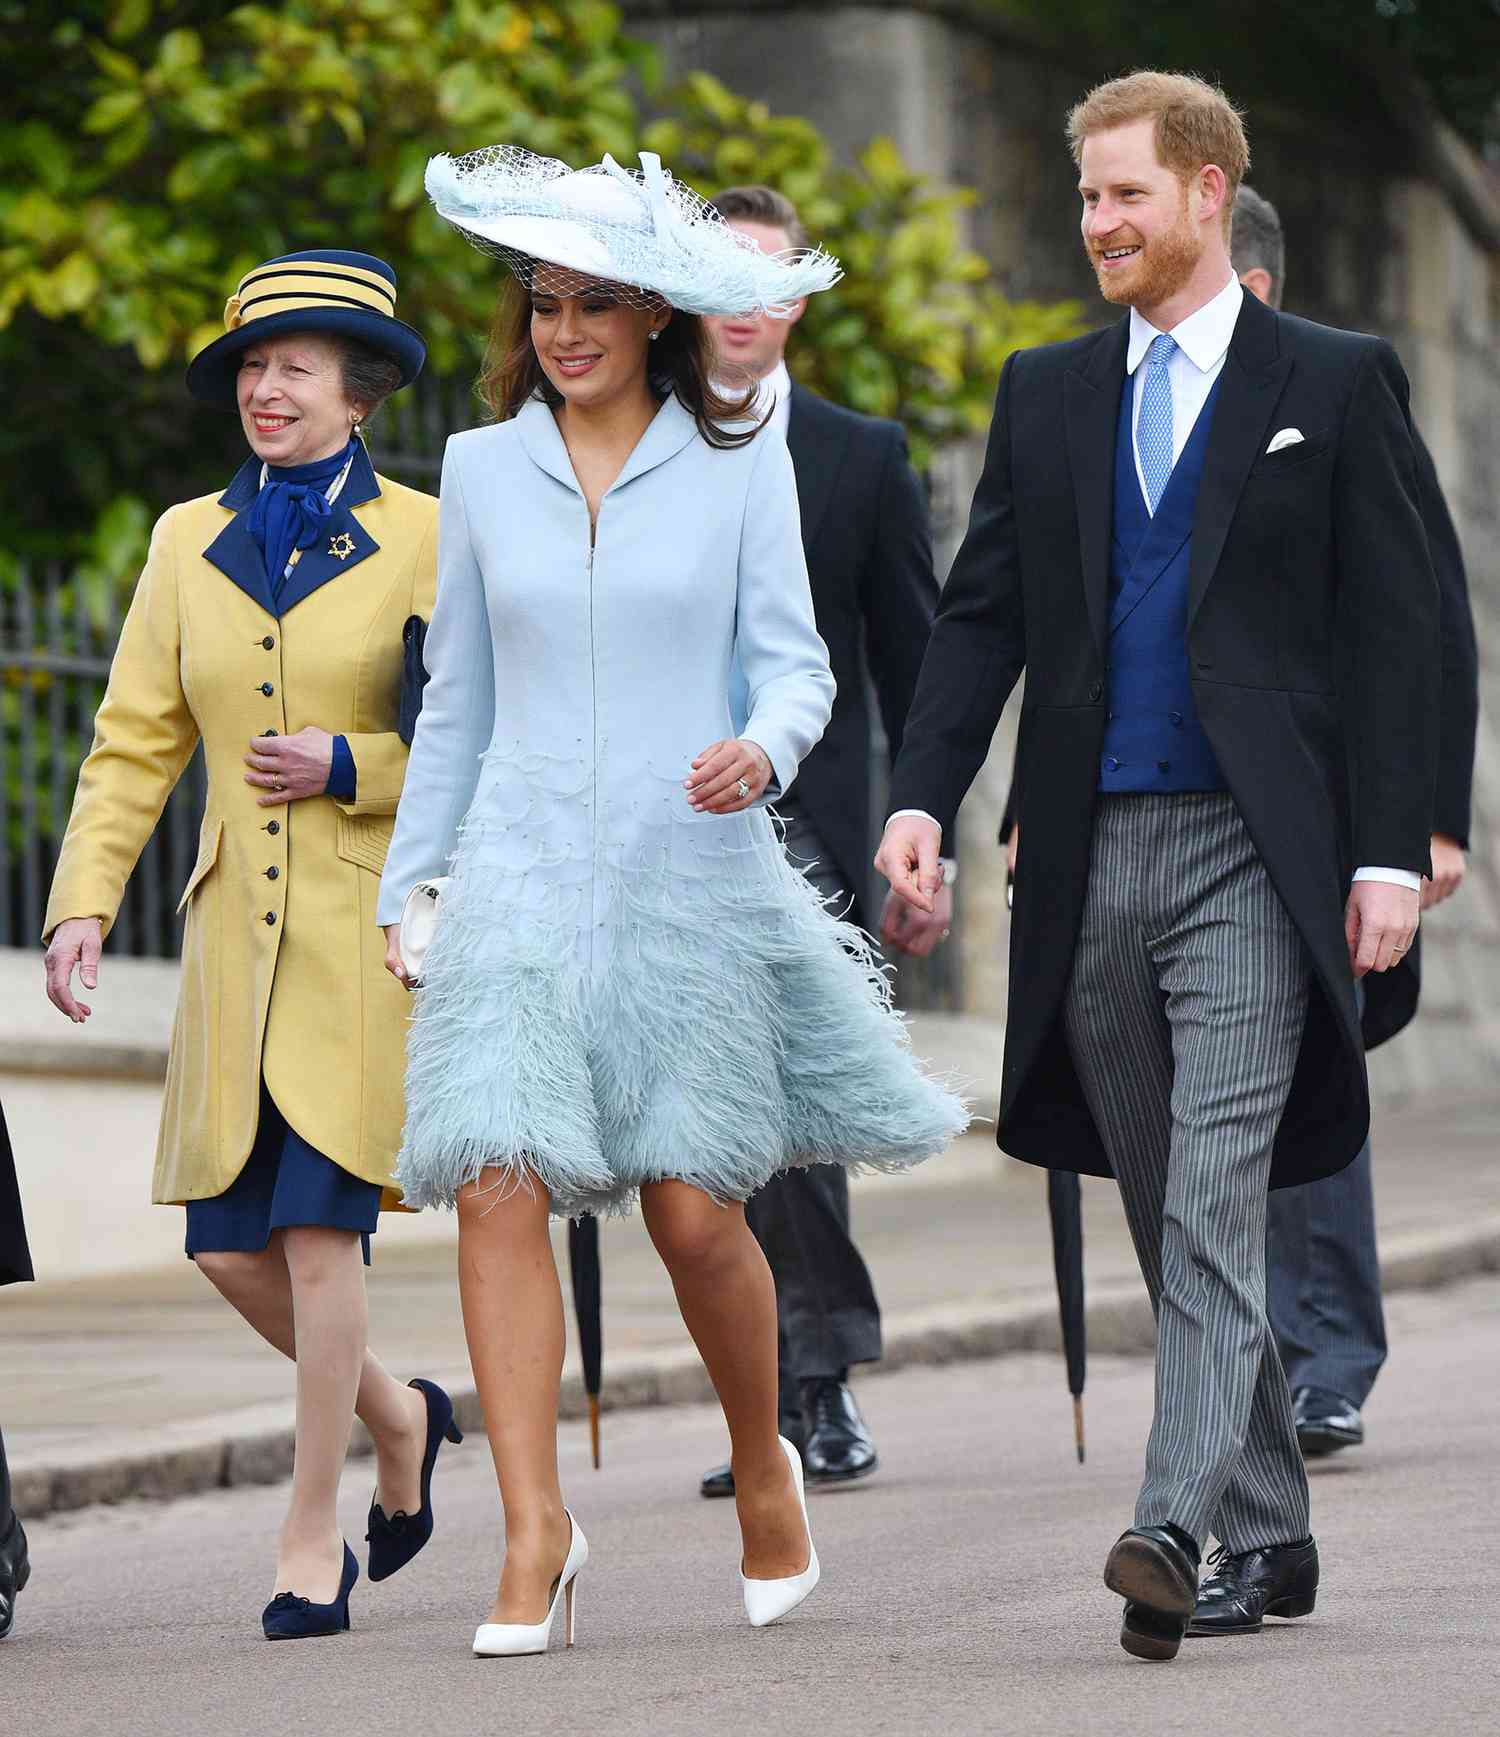 Mandatory Credit: Photo by Tim Rooke/REX/Shutterstock (10239423bb) Princess Anne, Sophie Winkleman and Prince Harry The wedding of Lady Gabriella Windsor and Thomas Kingston, St George's Chapel, Windsor Castle, UK - 18 May 2019